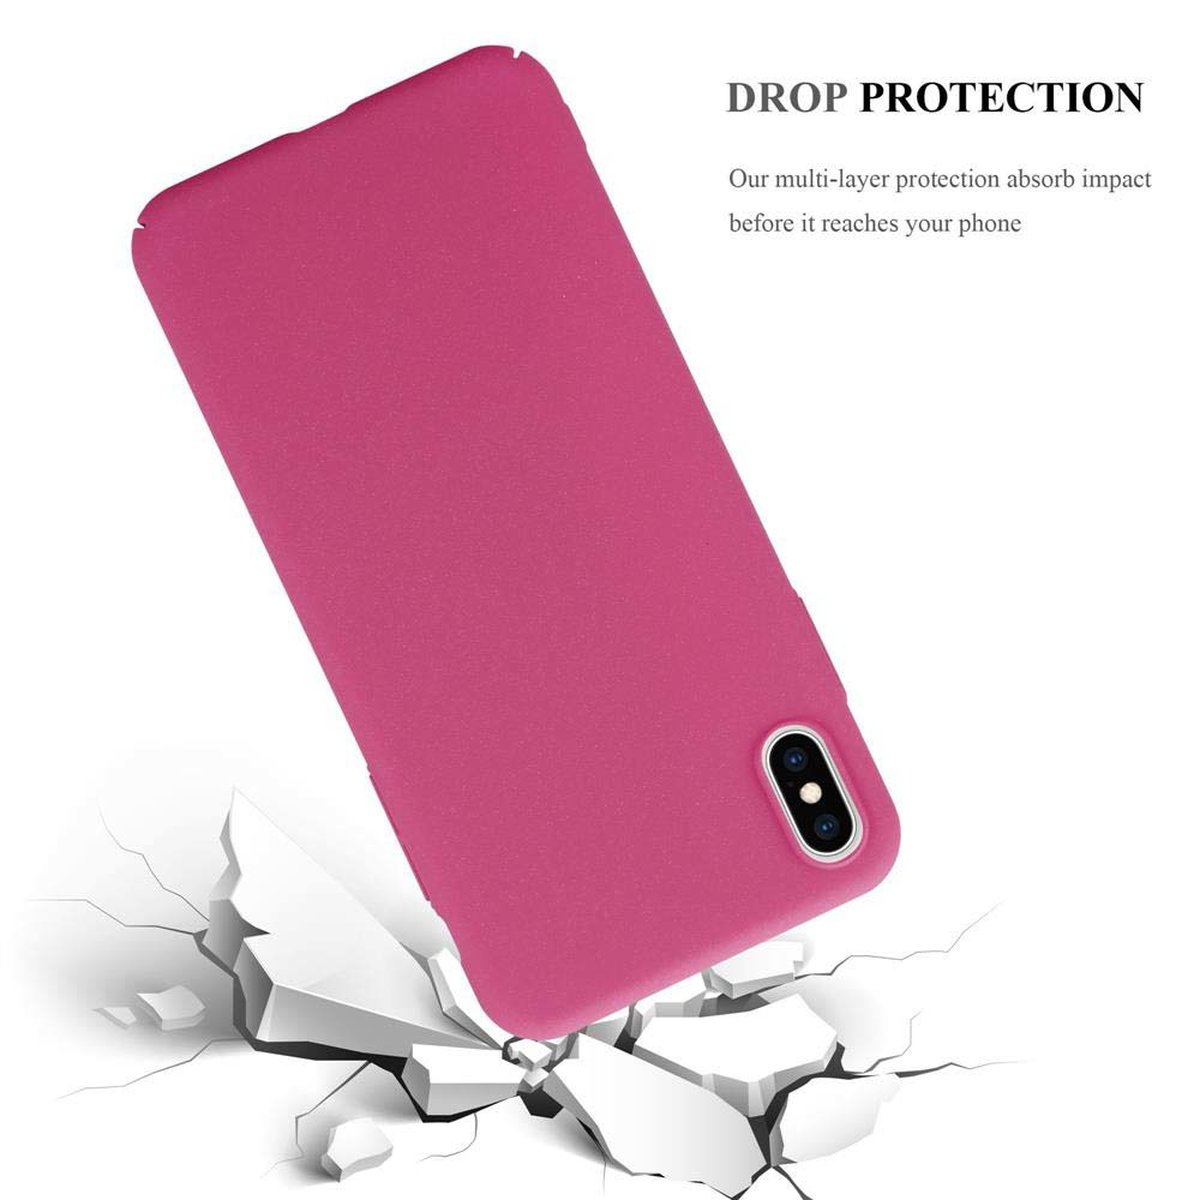 XS FROSTY Backcover, Style, Case MAX, PINK Frosty CADORABO Hülle iPhone Apple, im Hard